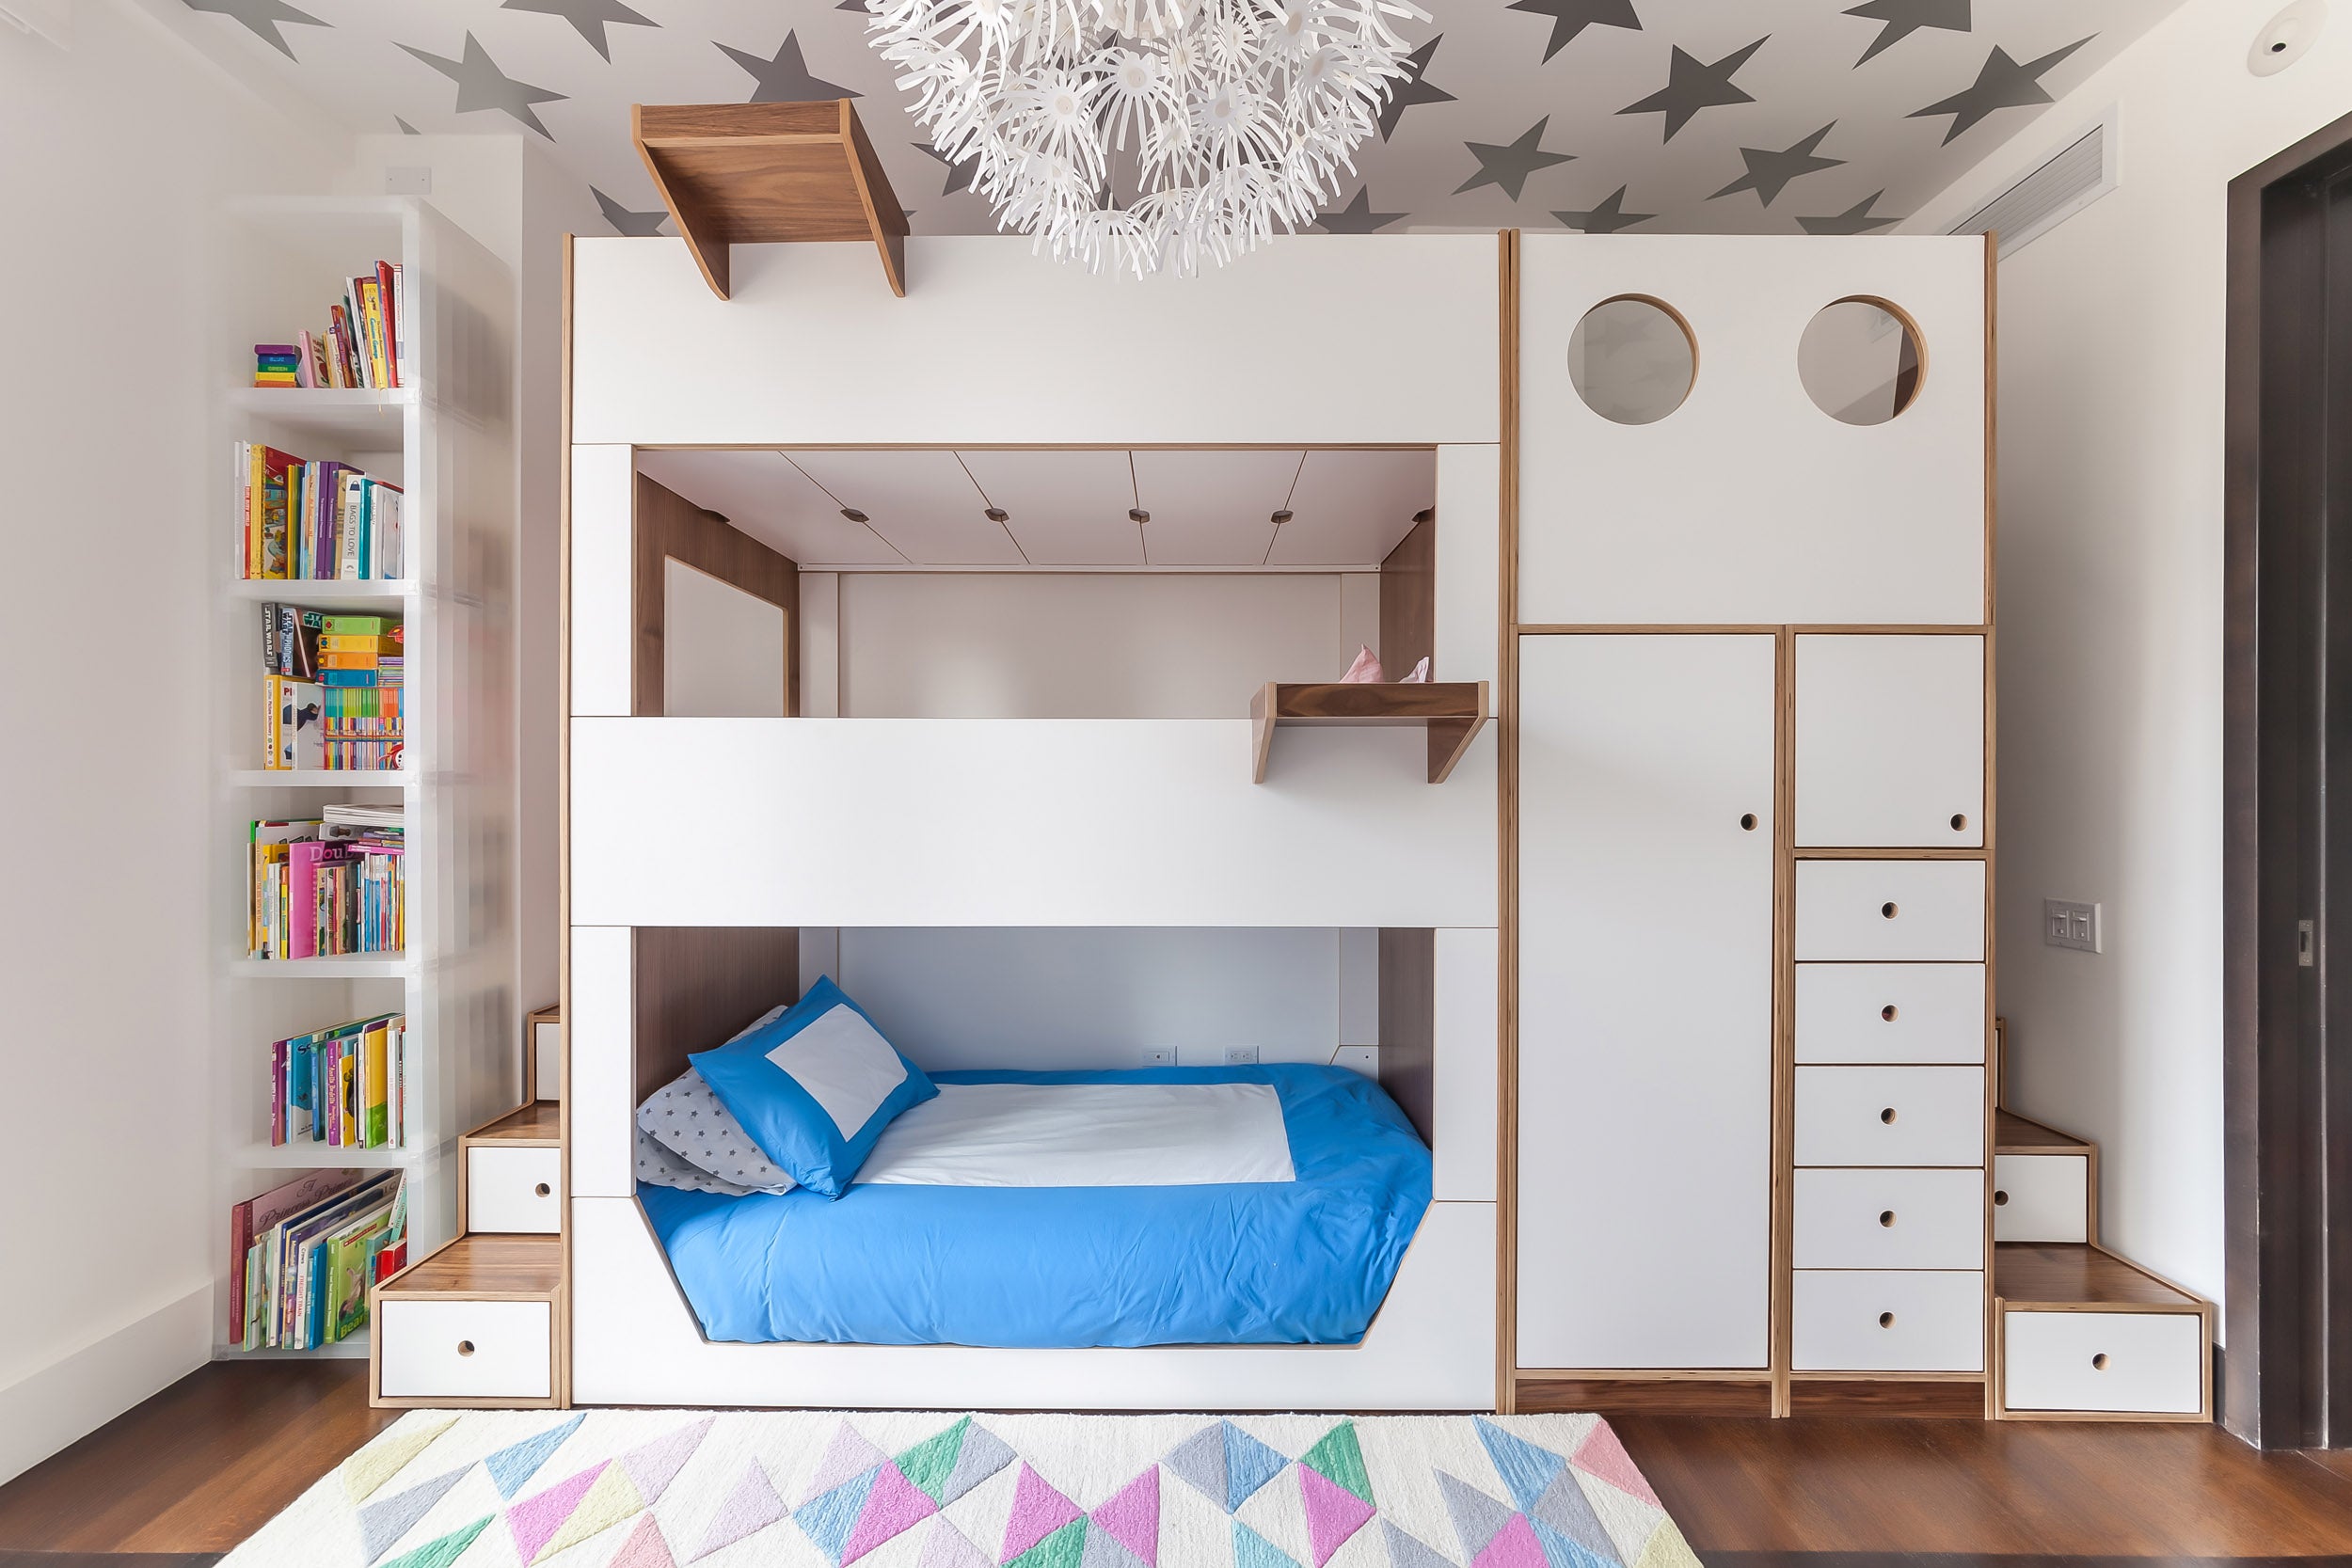 Modern kids' room with a white bunk bed, built-in storage, star-patterned ceiling, and colorful rug.